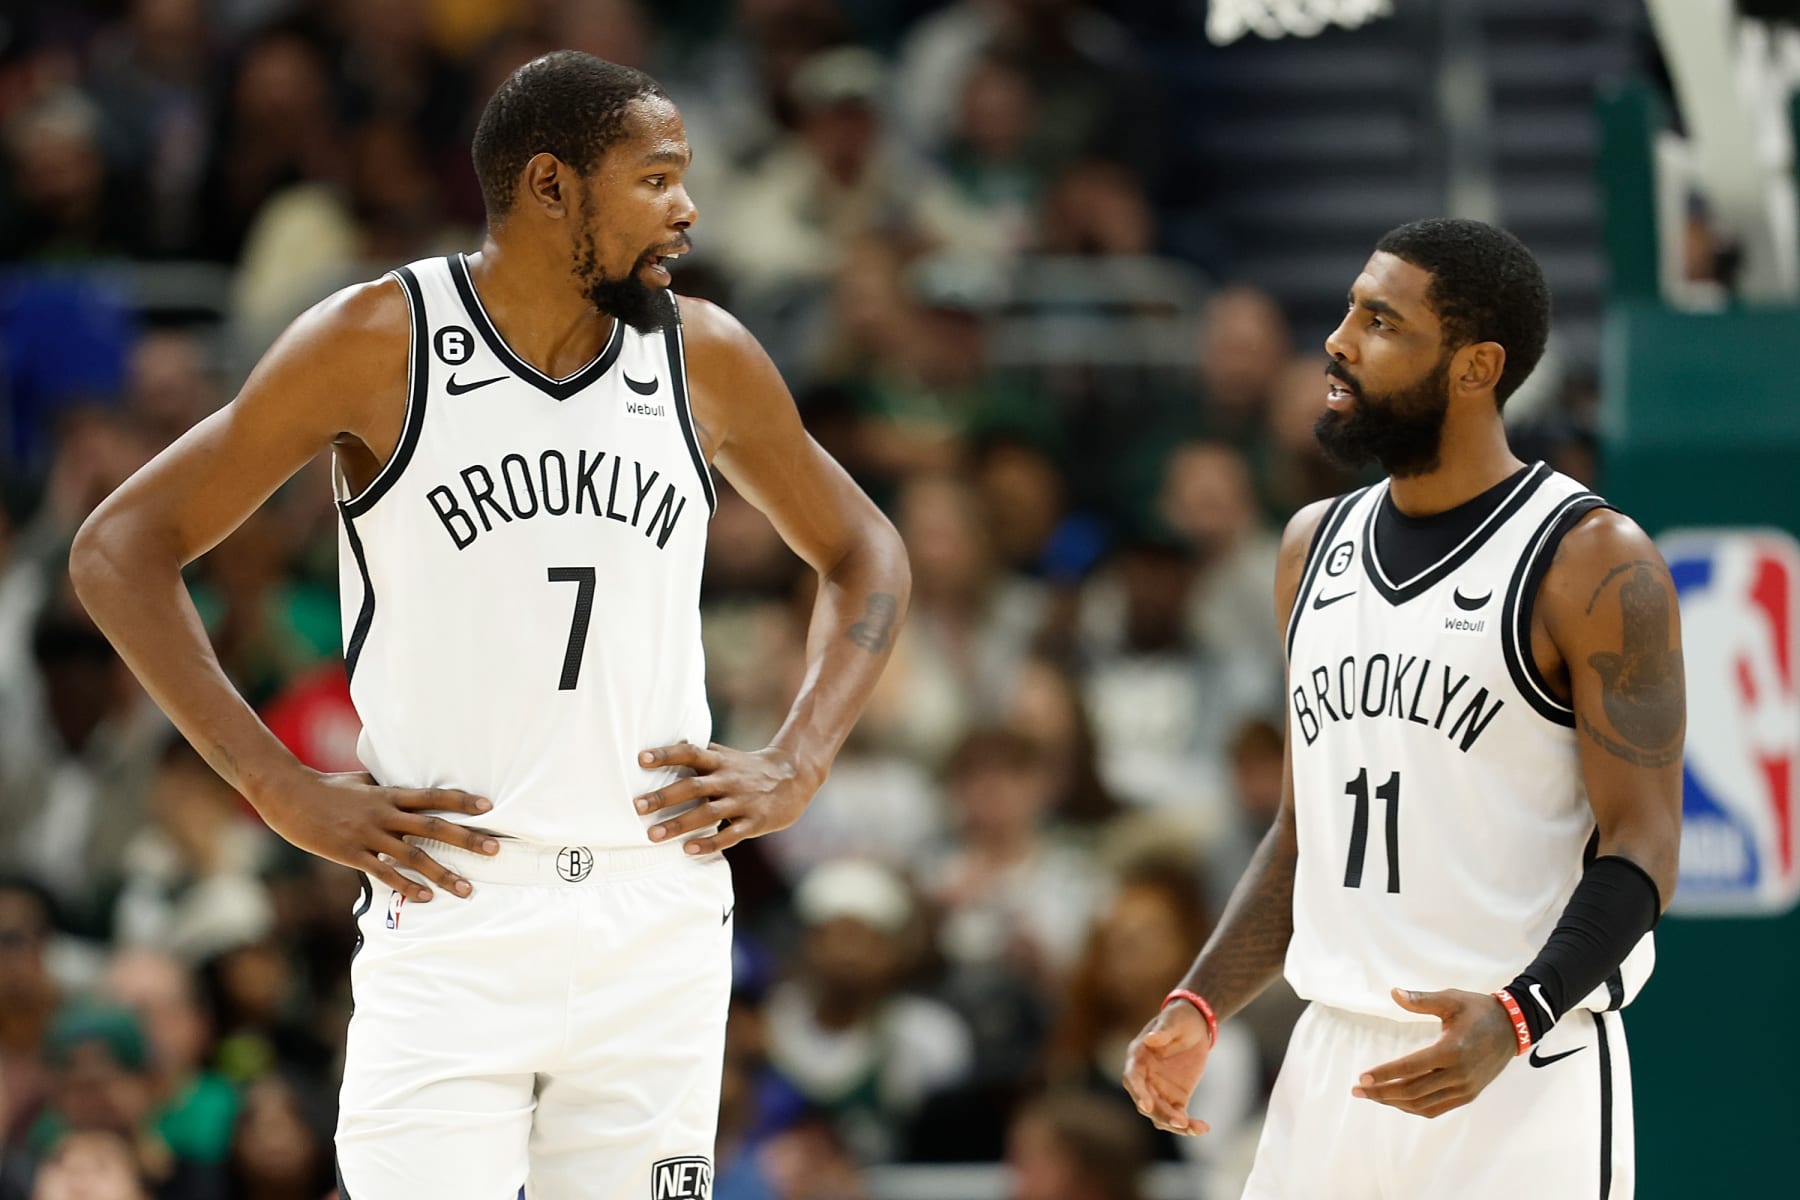 Brooklyn Nets forward Kevin Durant discusses teammates Kyrie